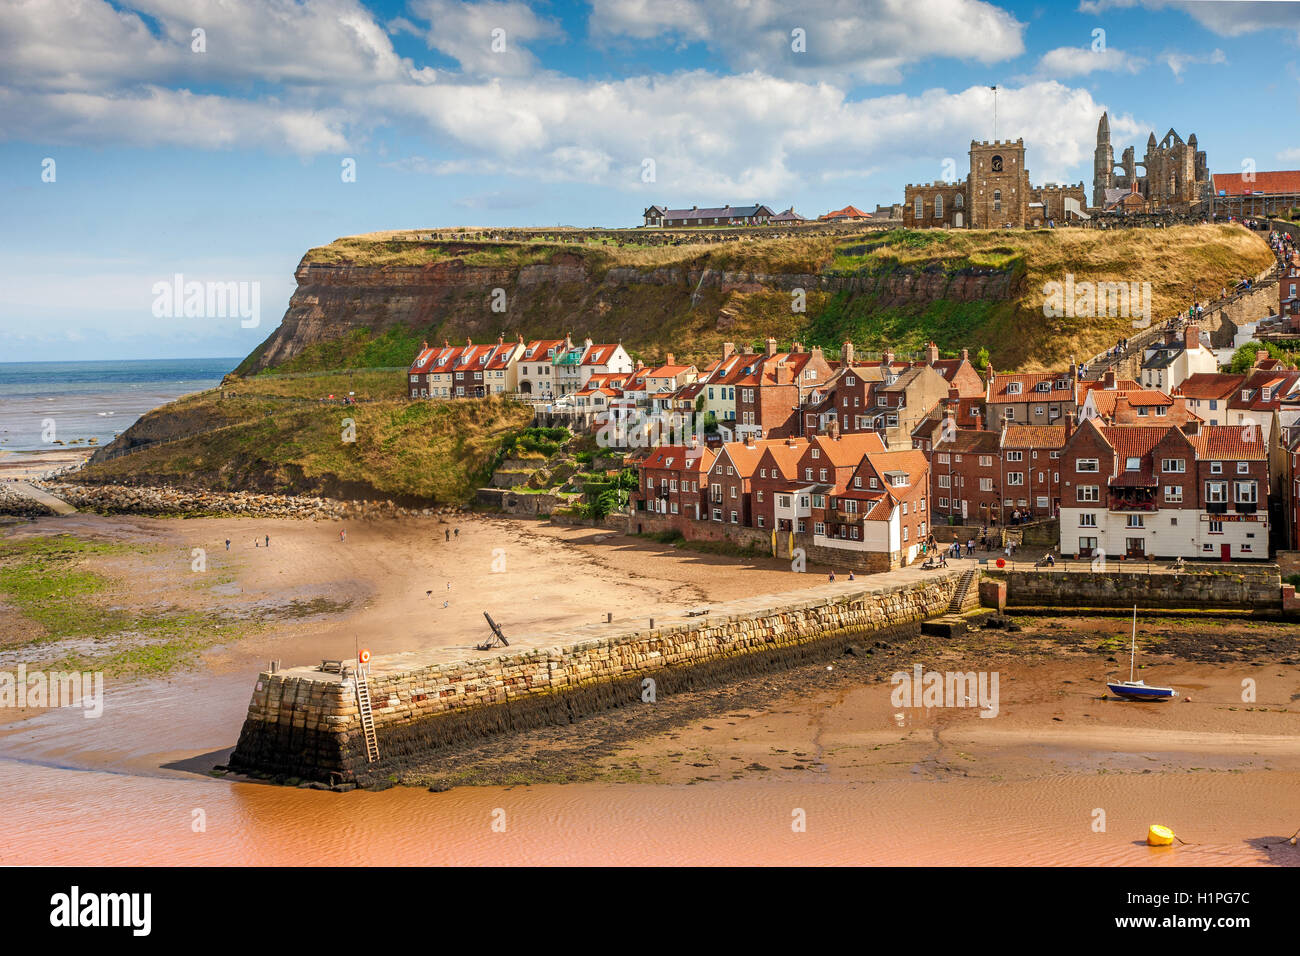 Whitby harbour, Yorkshire, N/E England. Stock Photo